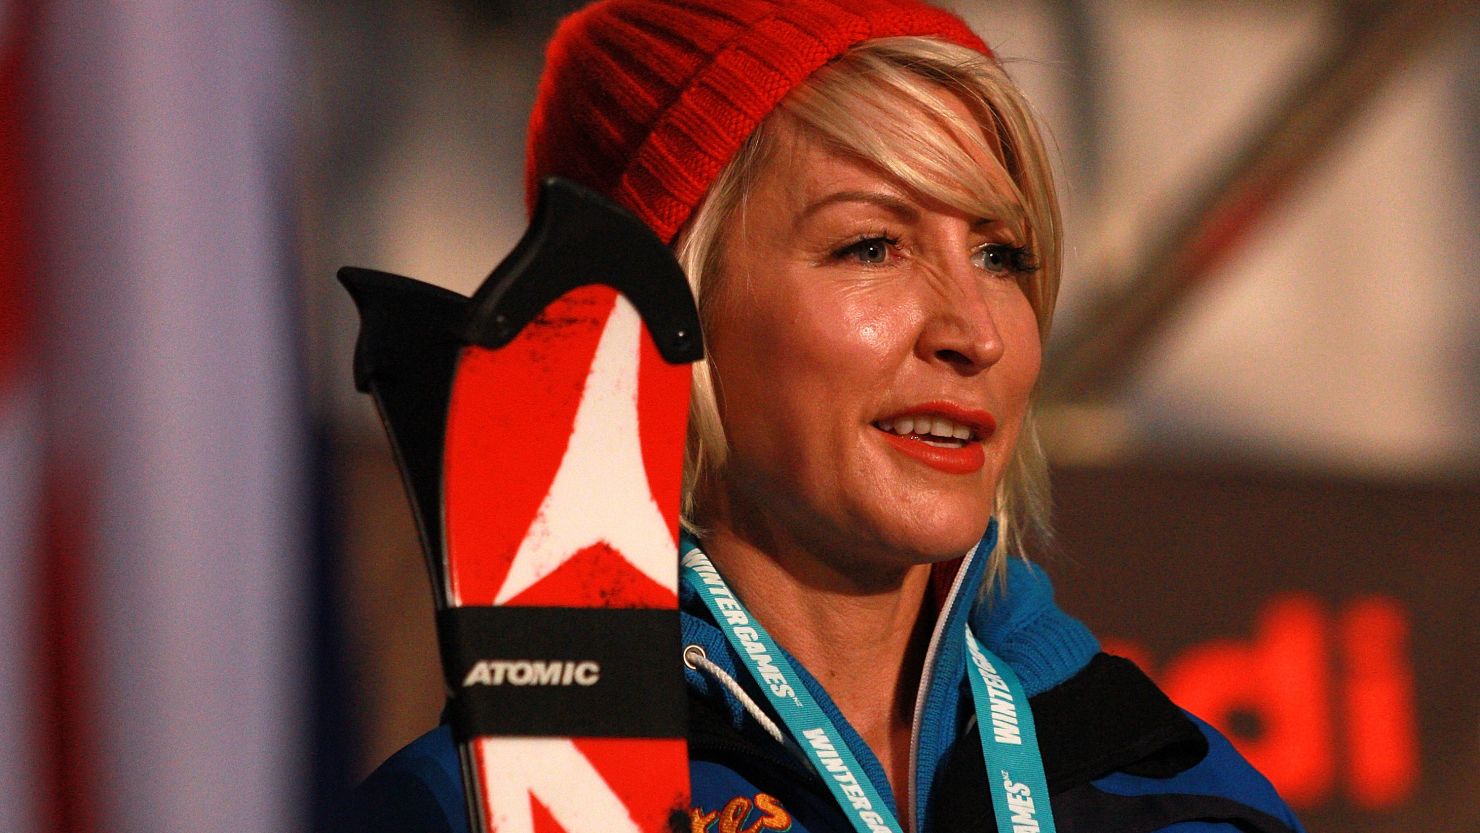 Heather Mills announced in late 2010 she was bidding to make the British Paralympic team for the 2014 Games.